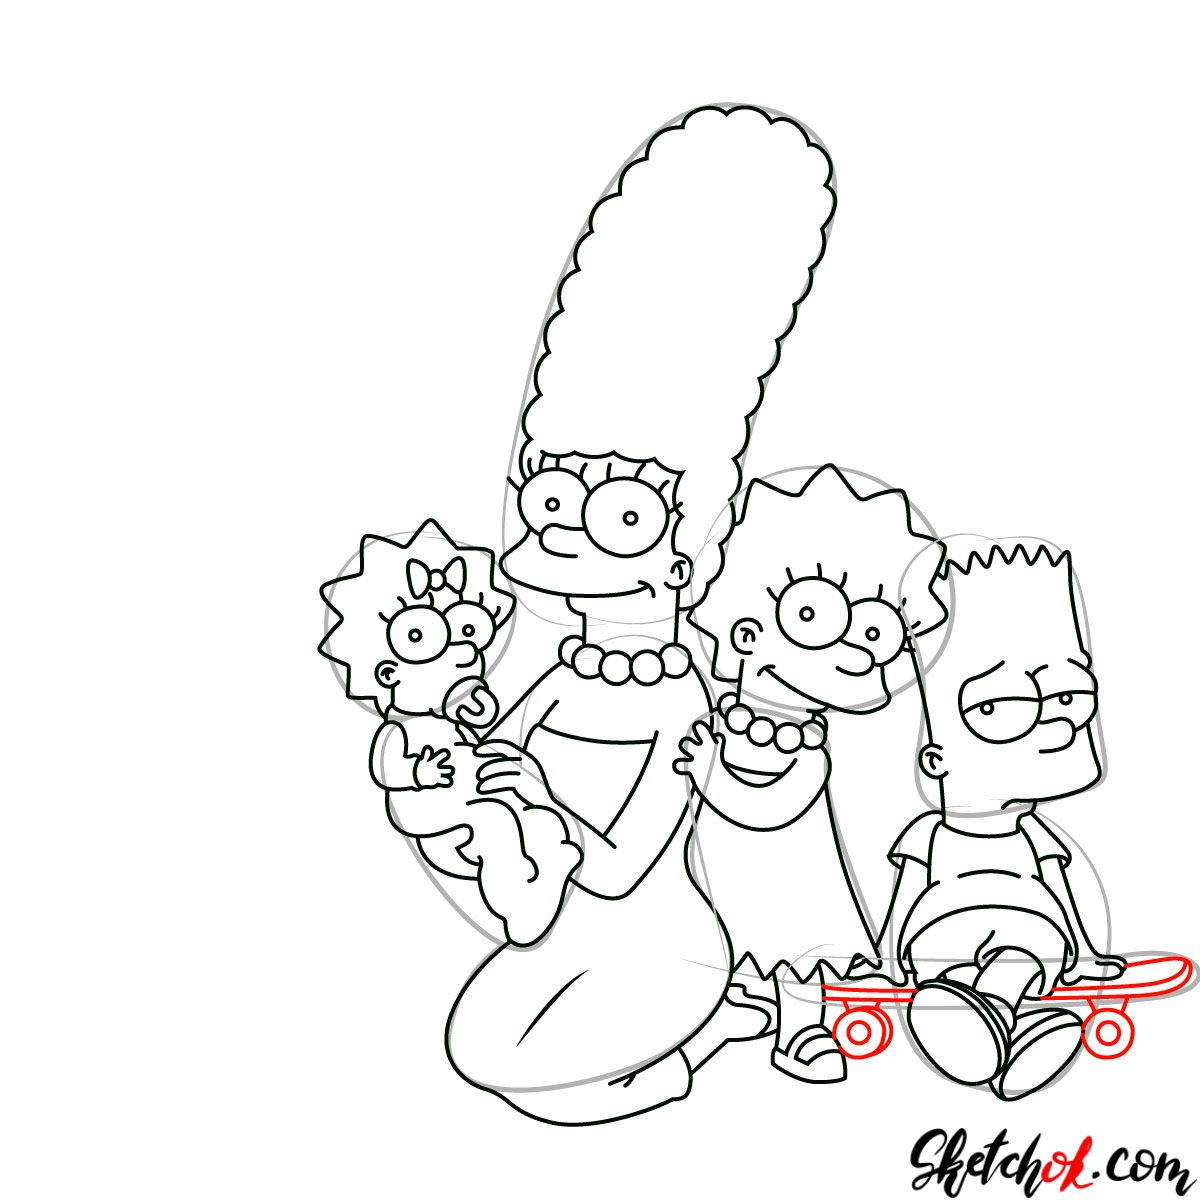 How to draw the Simpsons Family - step 22